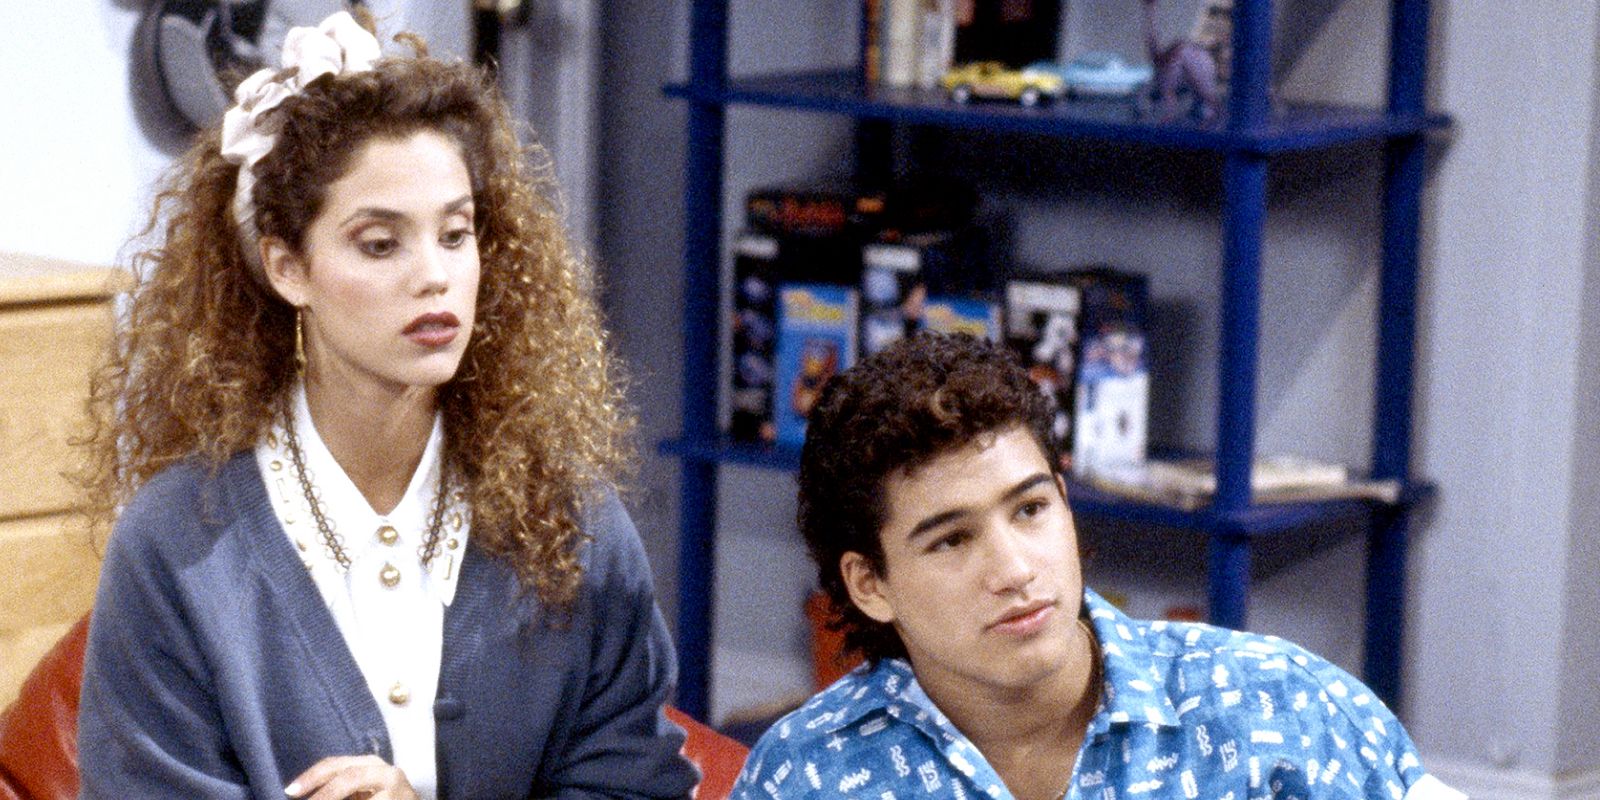 Saved By The Bell 5 Ways The Reboot Improves On The Original Show (& 5 The Original Was Better)